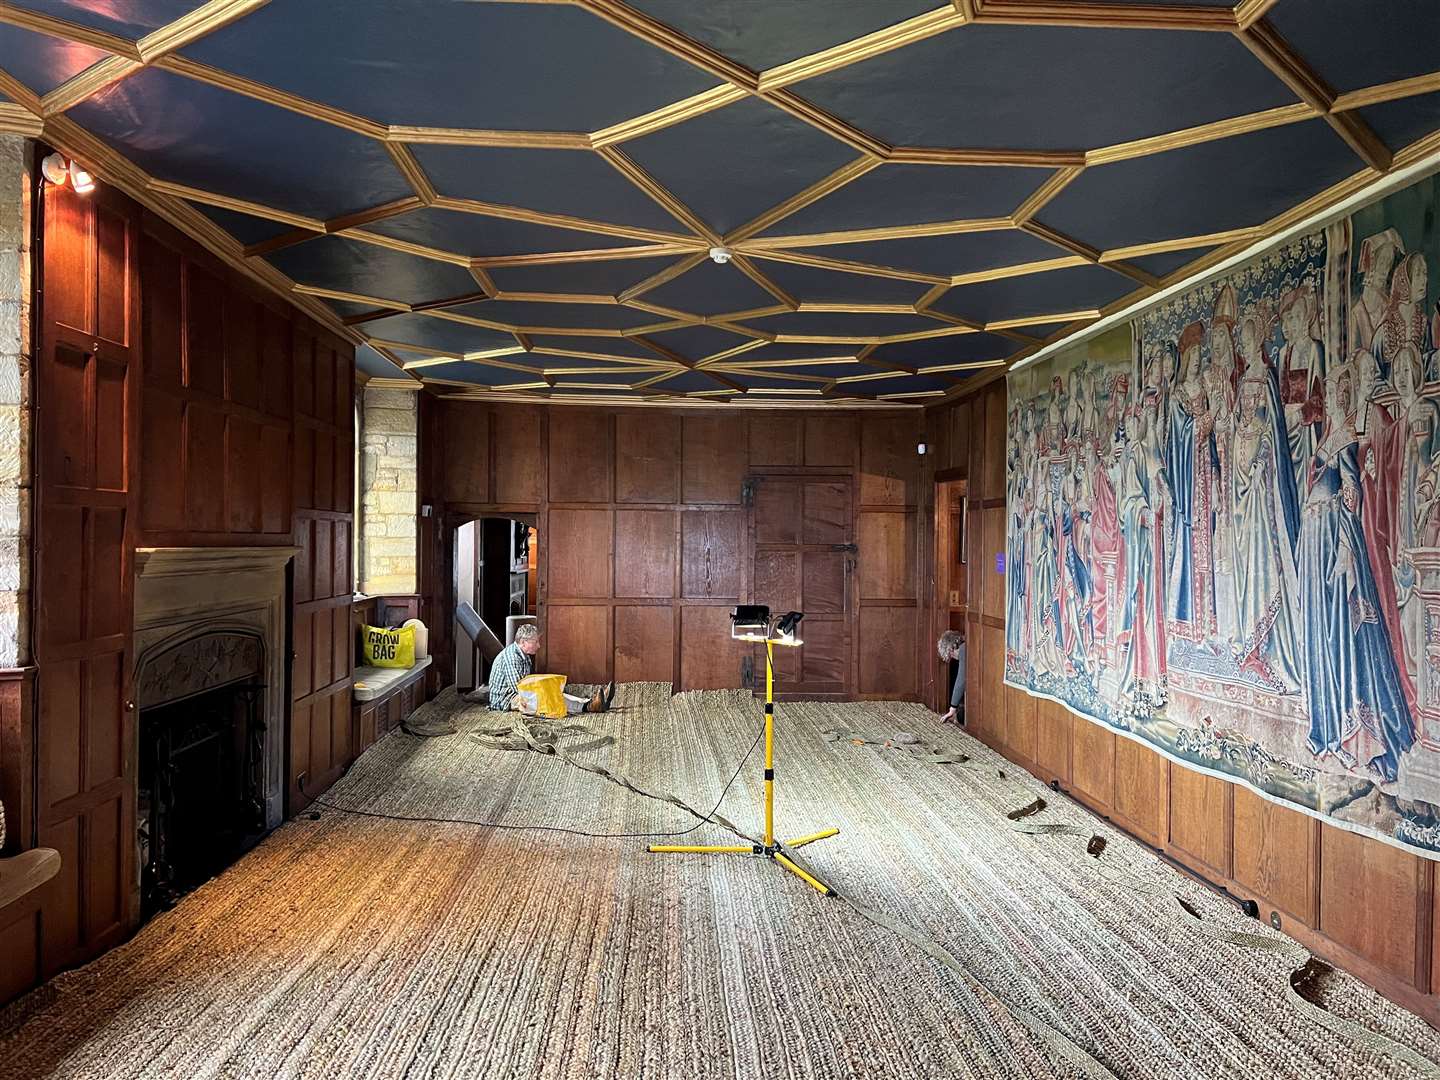 Renovation of the Great Chamber at Hever Castle. Photo: Hever Castle and Gardens